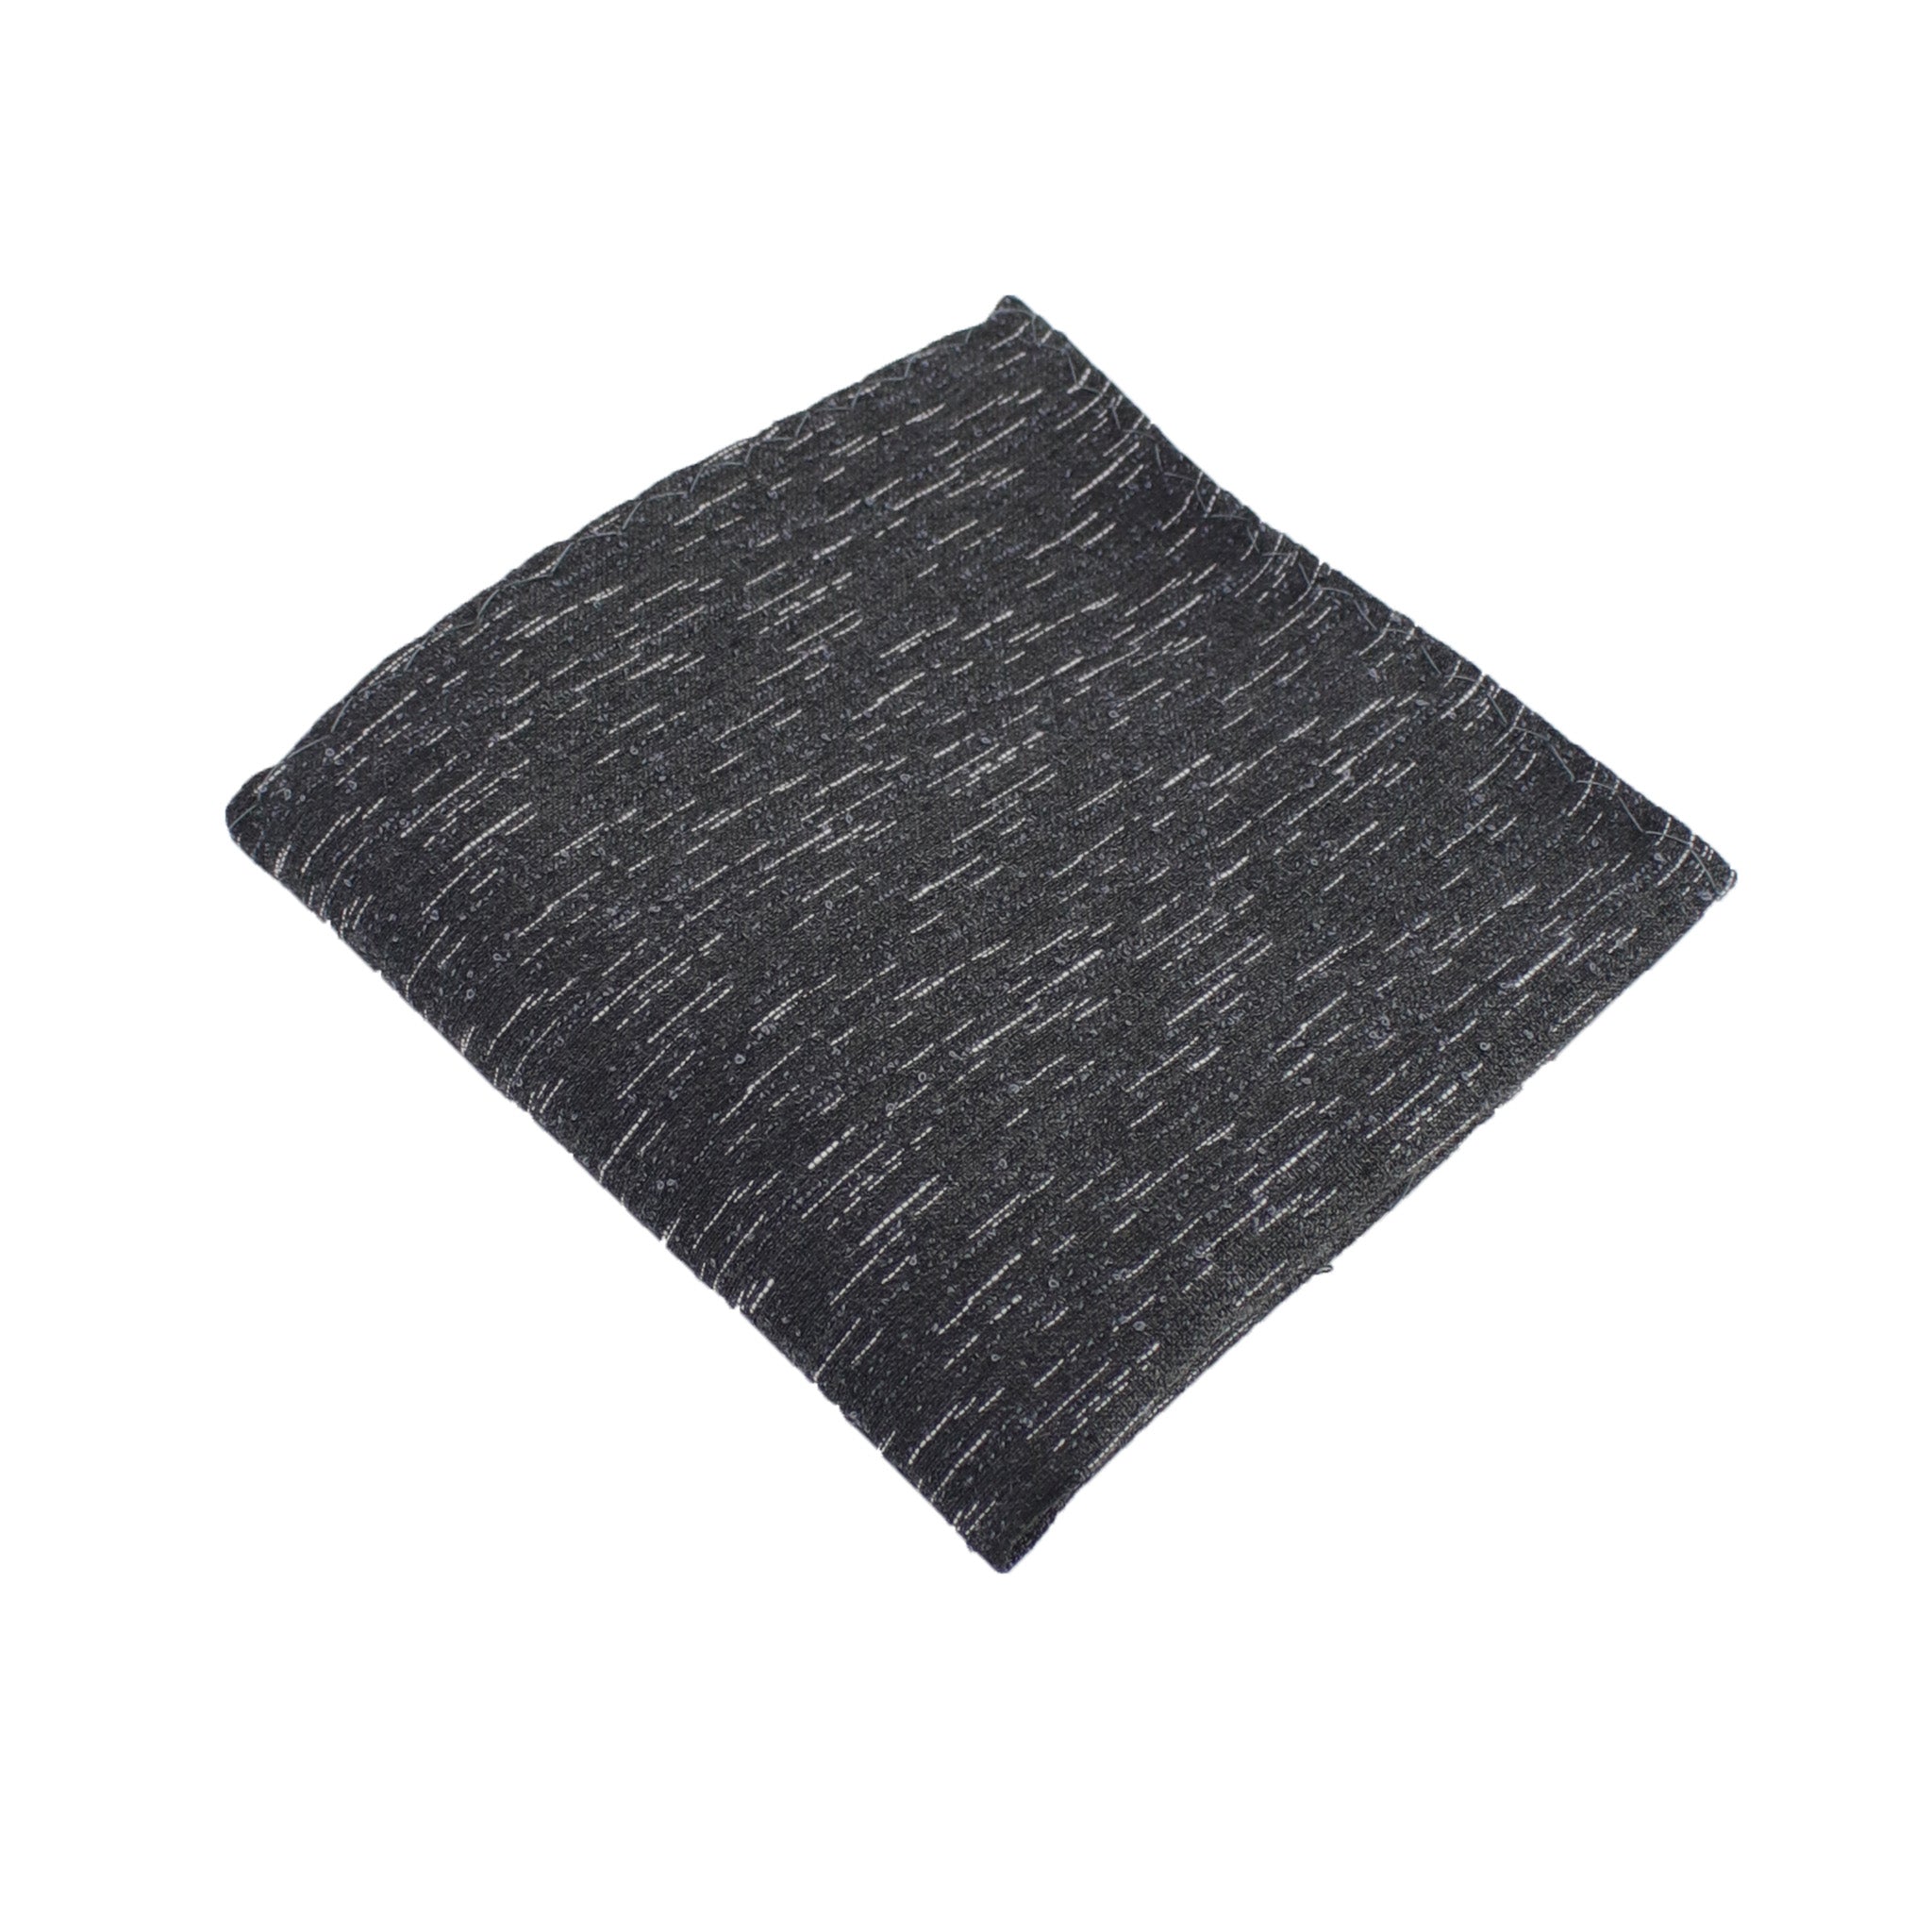 Charcoal Wool Textured Pocket Square from DIBI